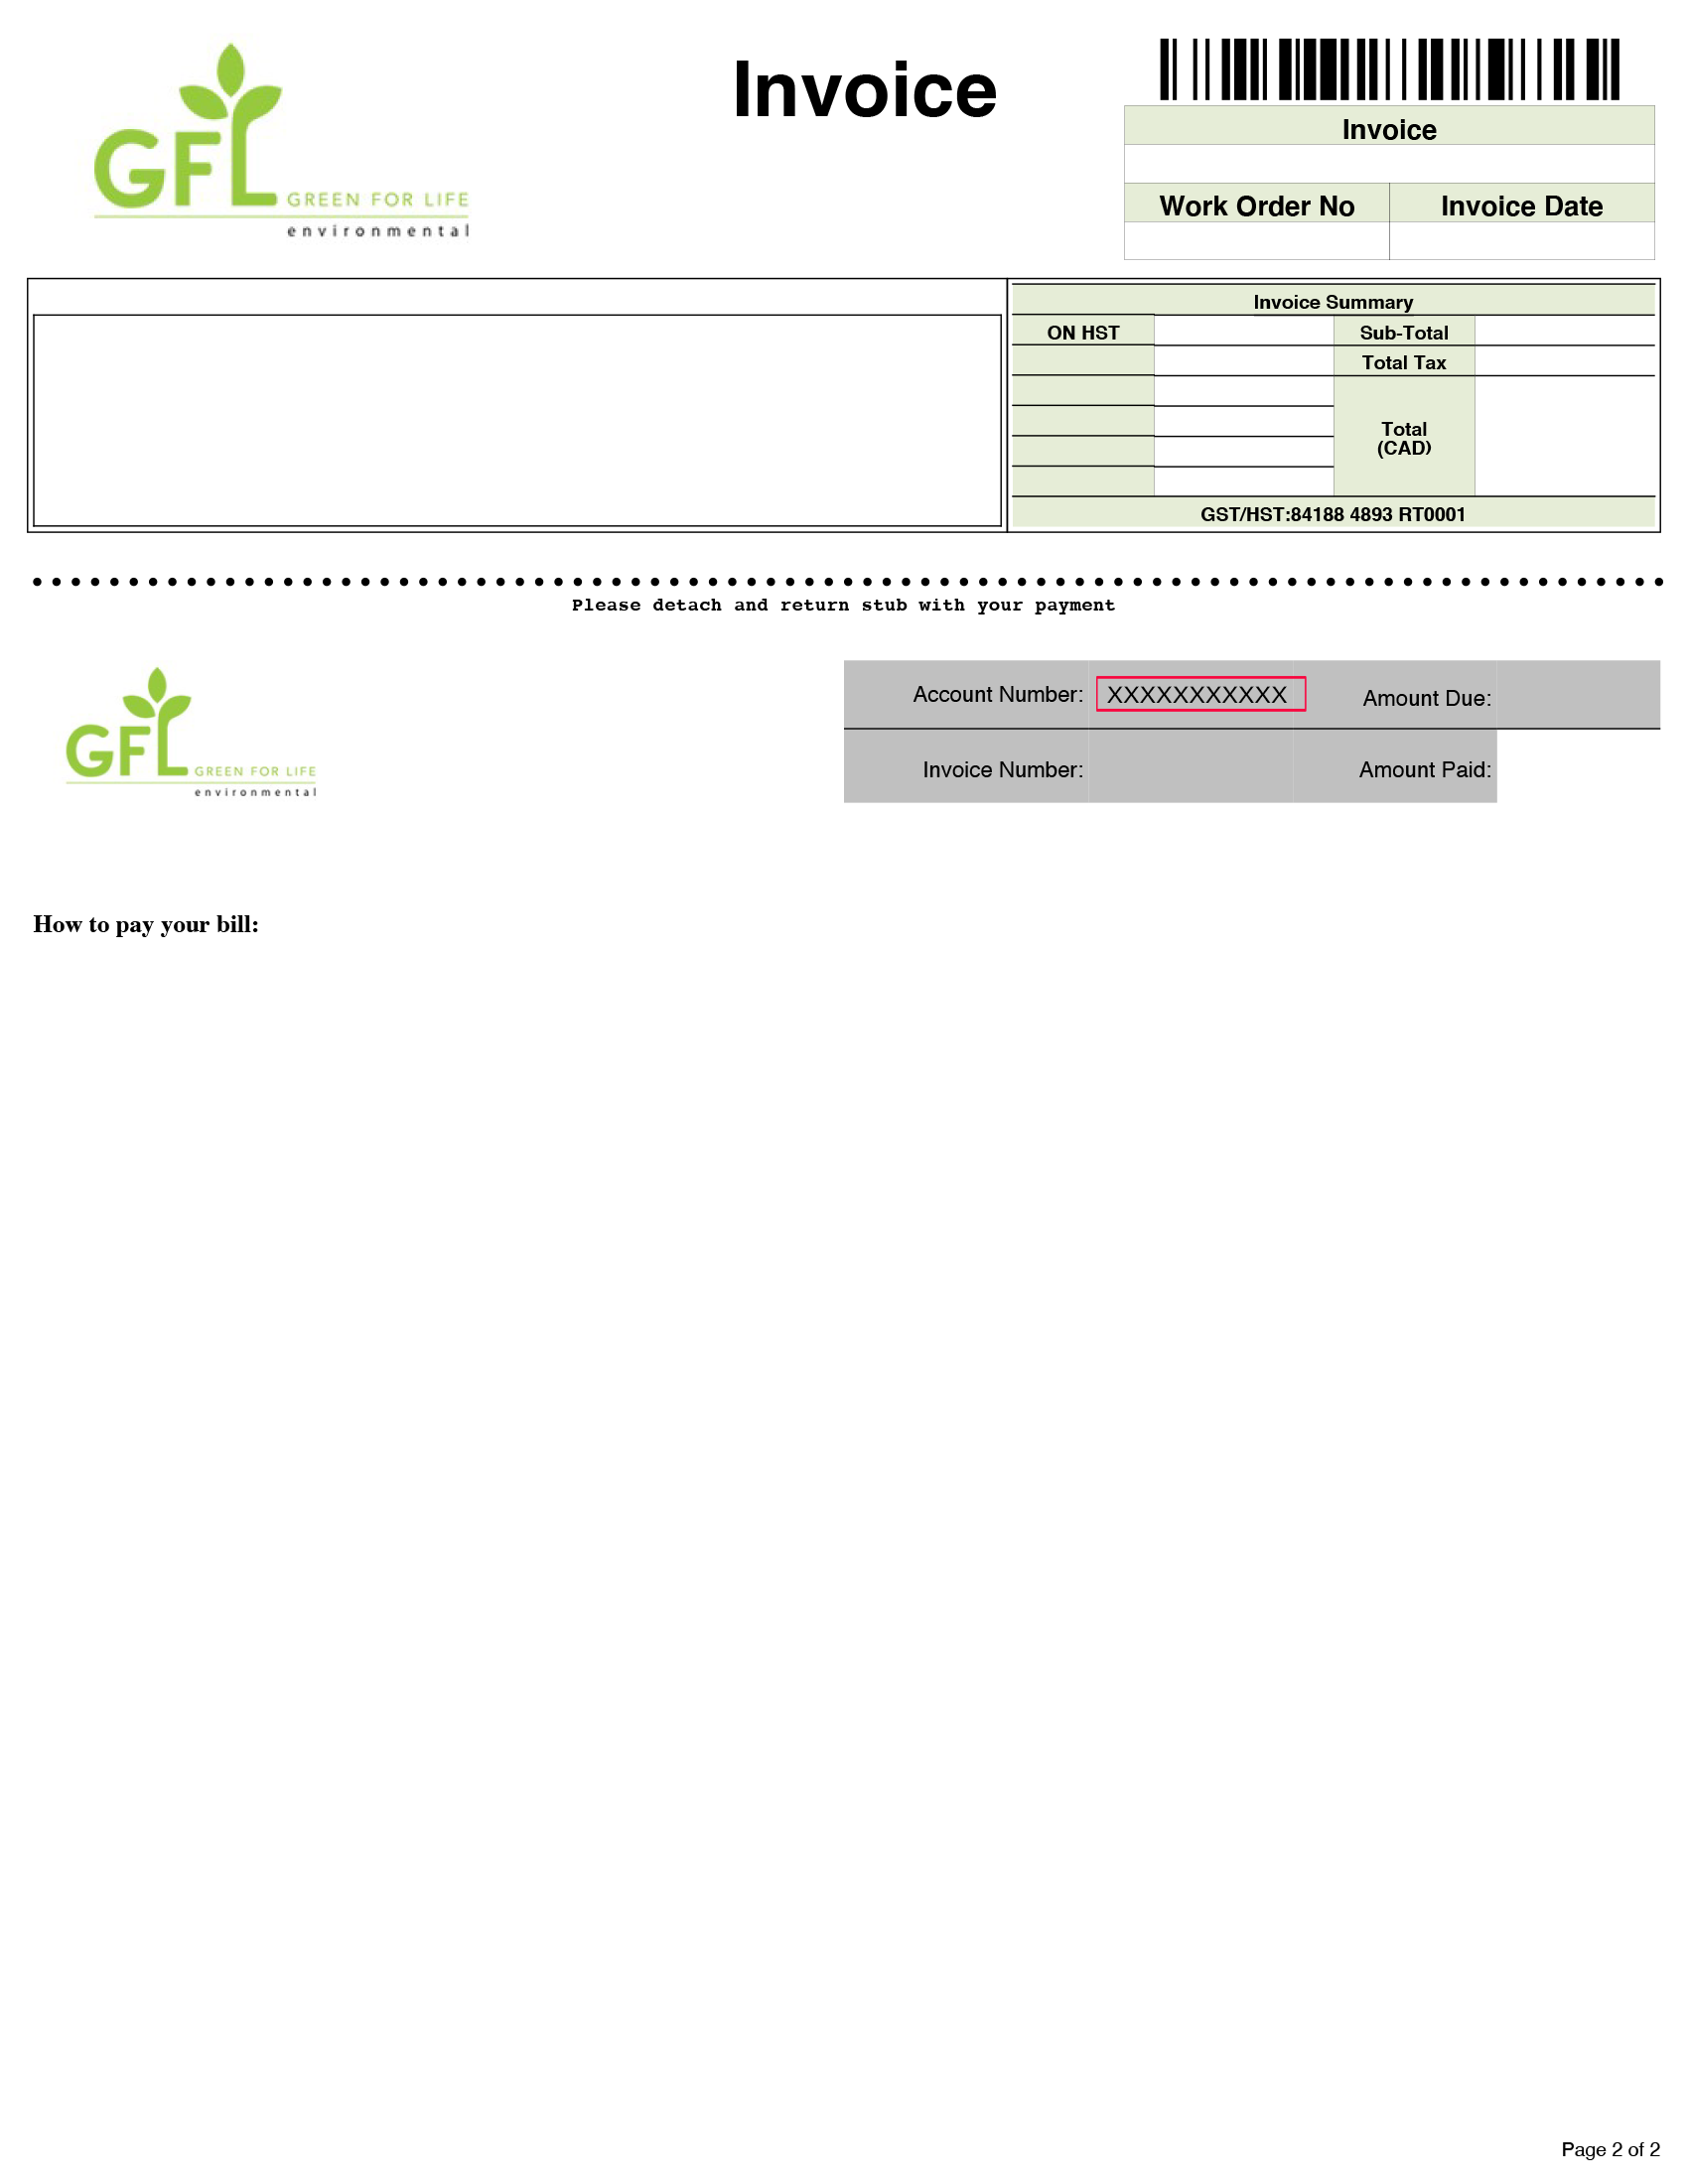 Invoice Template for A1 Sewage Services Customers